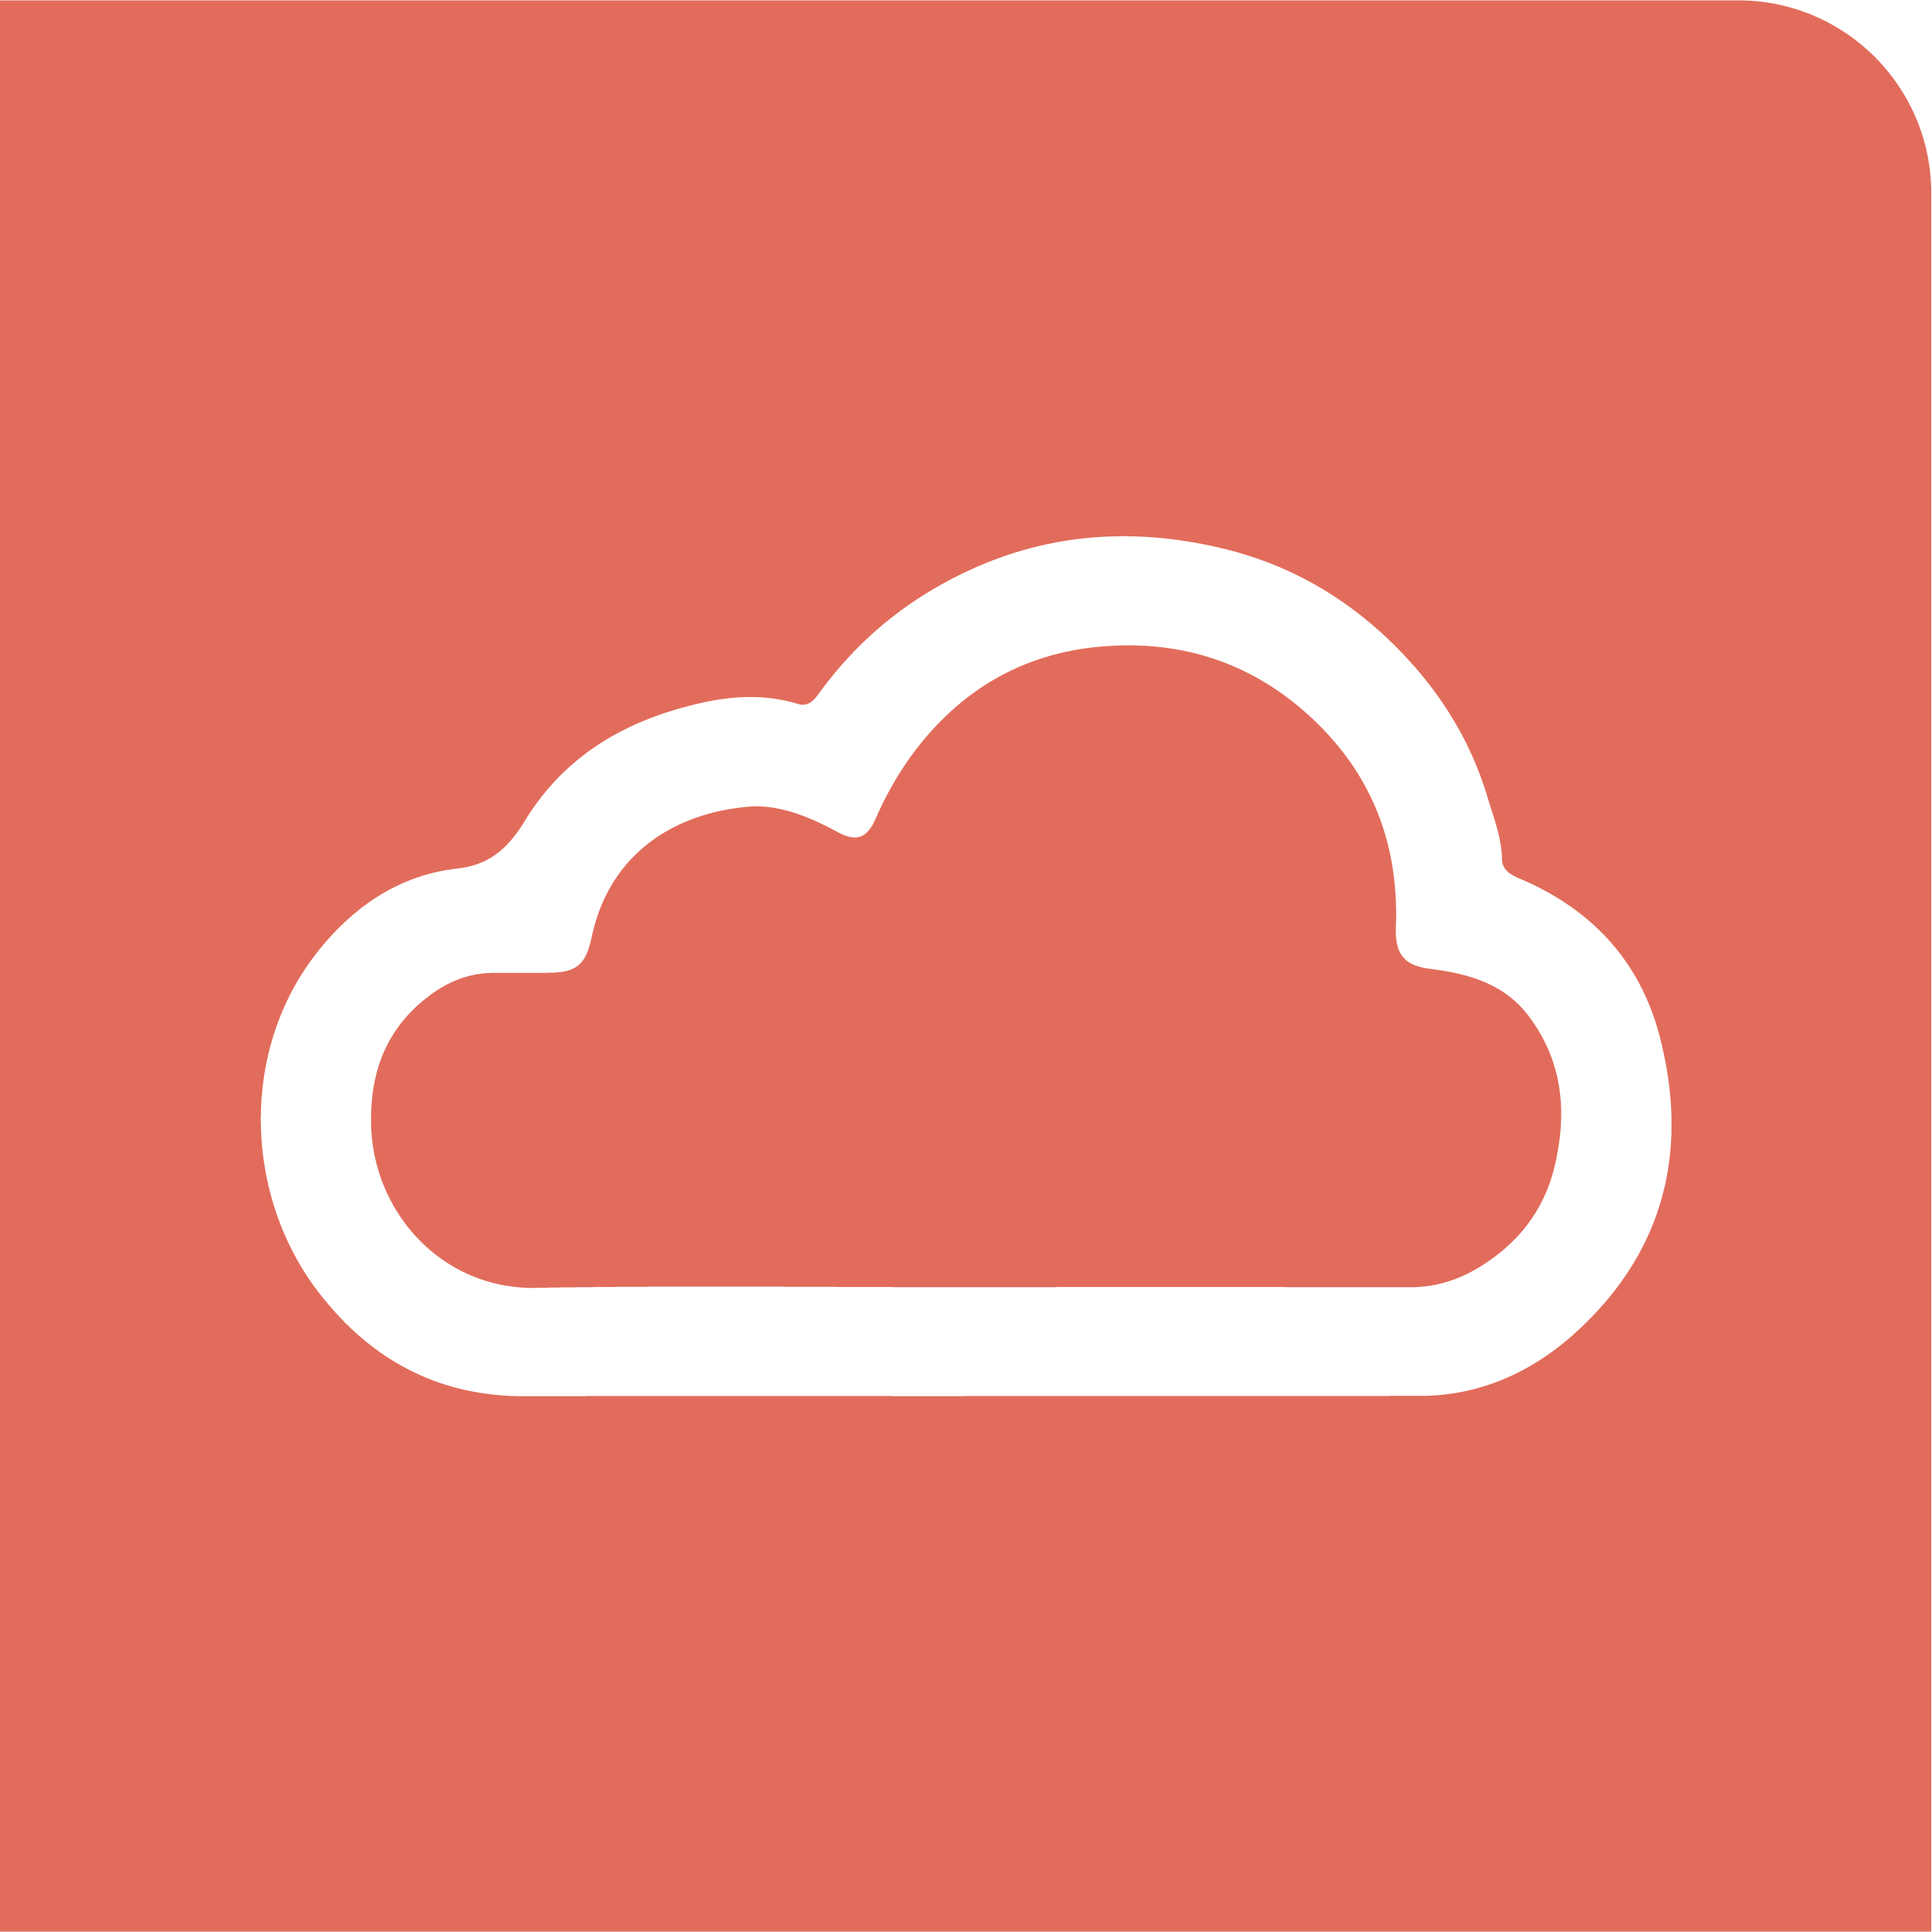 Tasks that Clients / Contacts do on CaseWare Cloud